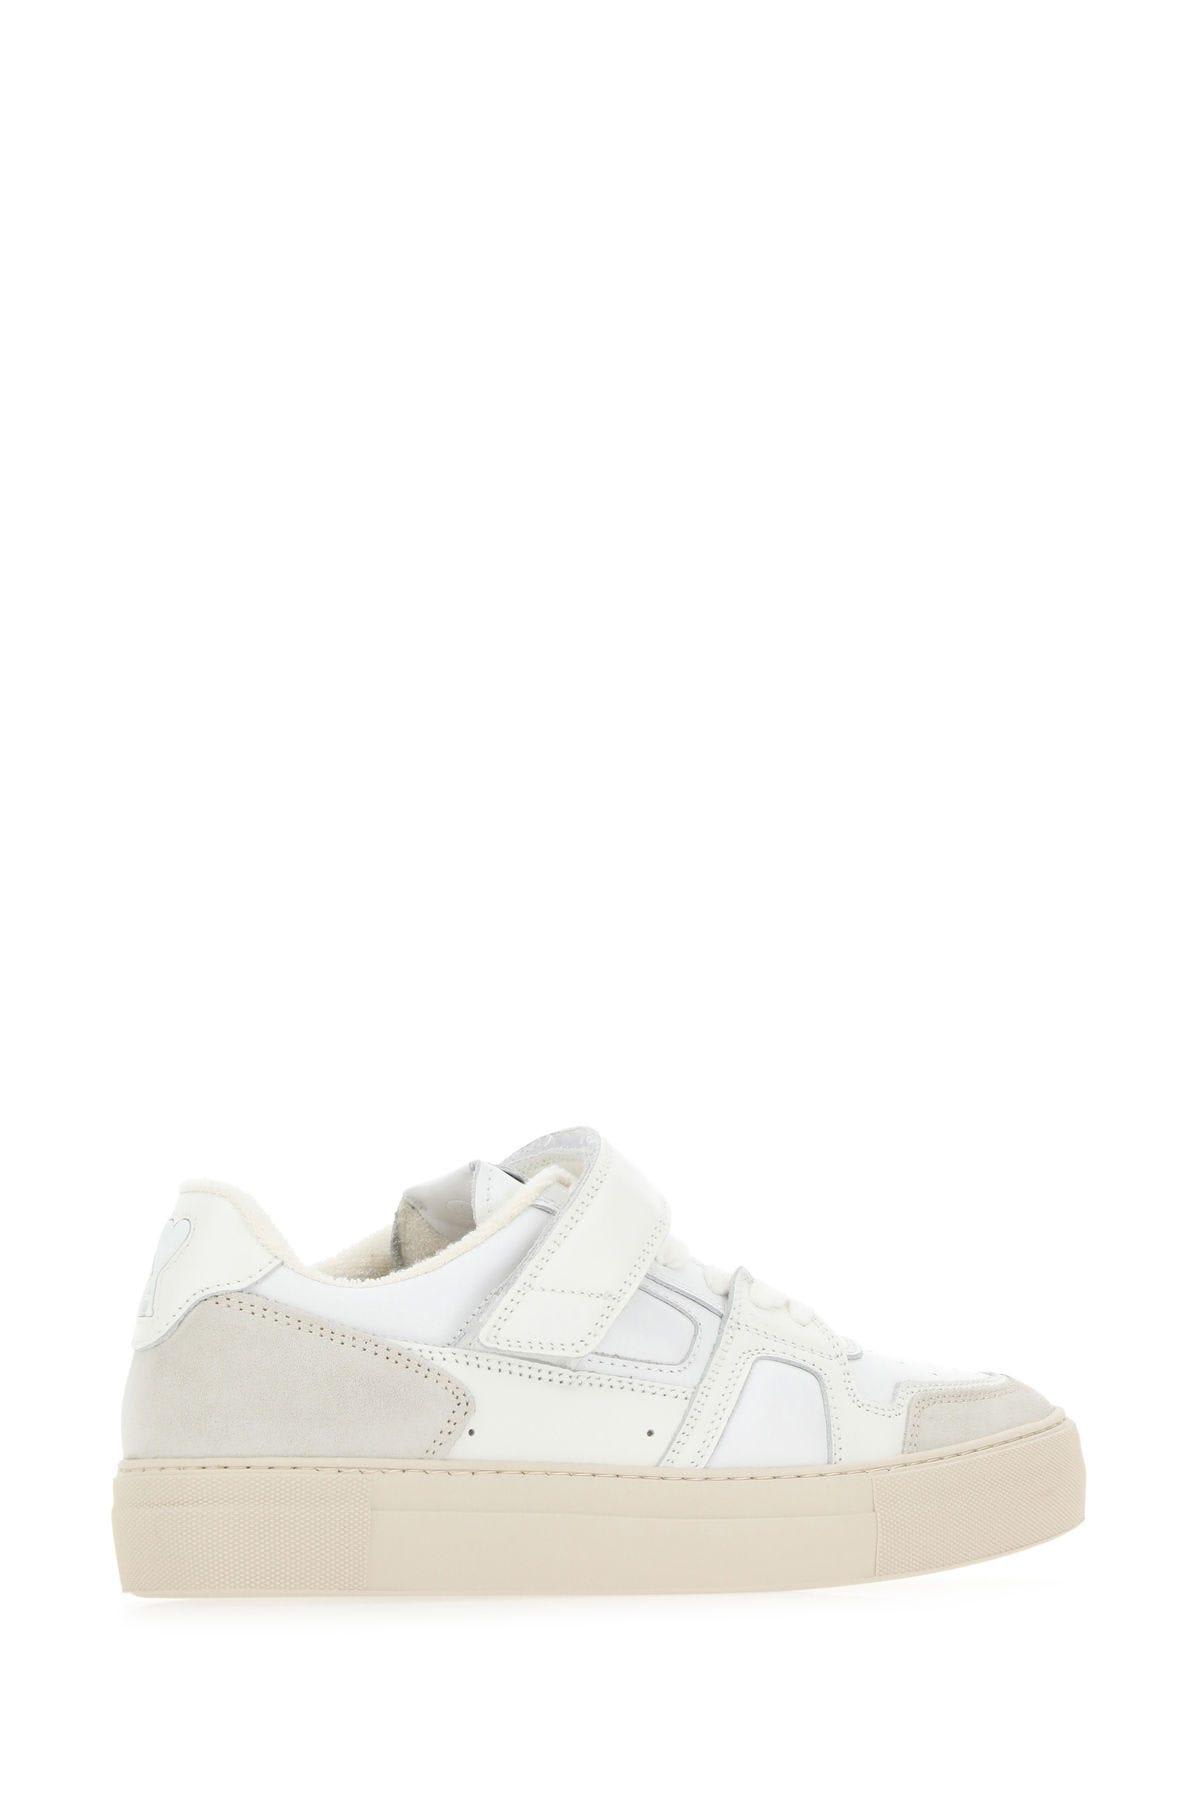 Shop Ami Alexandre Mattiussi Two-tone Leather And Suede Arcade Sneakers In White